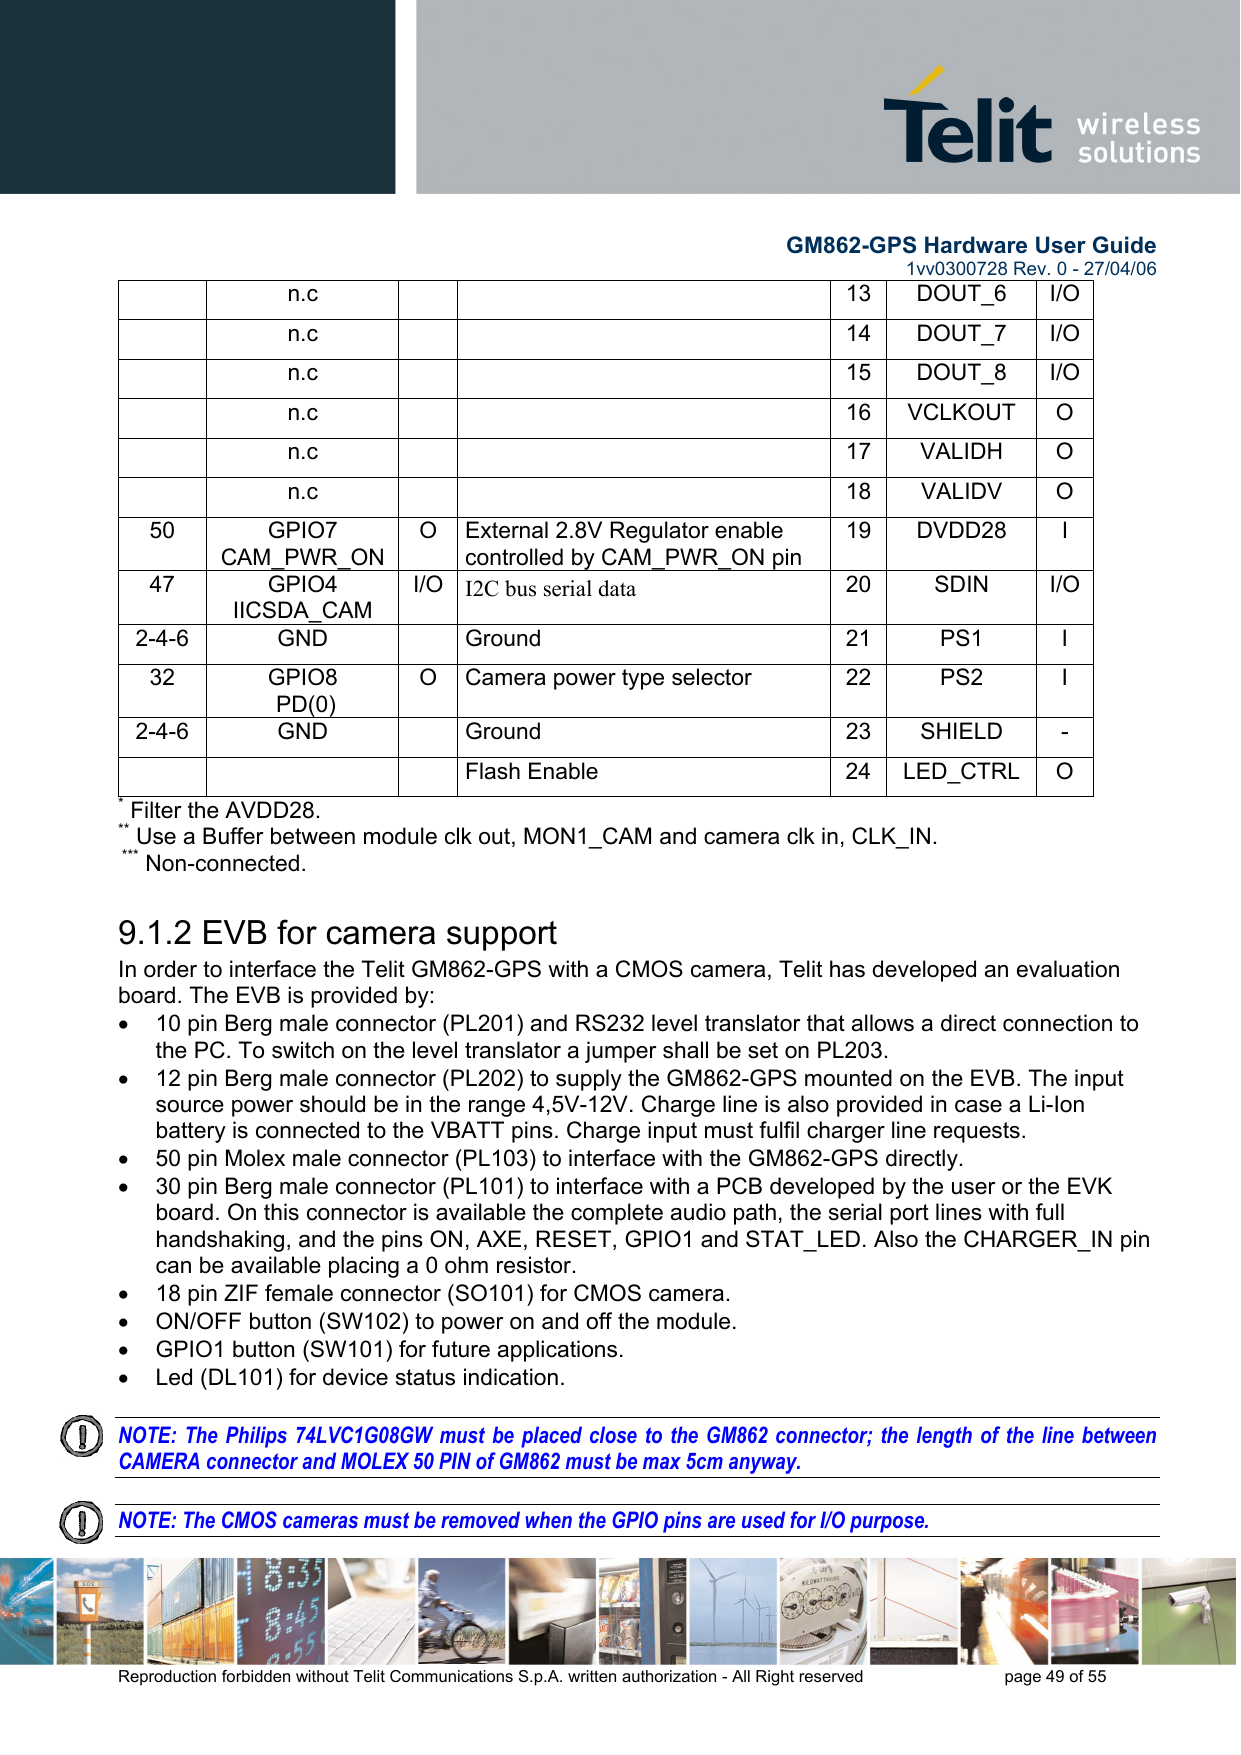        GM862-GPS Hardware User Guide   1vv0300728 Rev. 0 - 27/04/06    Reproduction forbidden without Telit Communications S.p.A. written authorization - All Right reserved    page 49 of 55   n.c    13 DOUT_6 I/O n.c    14 DOUT_7 I/O n.c    15 DOUT_8 I/O n.c    16 VCLKOUT O  n.c    17 VALIDH O  n.c    18 VALIDV O 50 GPIO7 CAM_PWR_ON O  External 2.8V Regulator enable controlled by CAM_PWR_ON pin 19 DVDD28  I 47 GPIO4 IICSDA_CAM I/O  I2C bus serial data  20 SDIN I/O2-4-6 GND   Ground  21 PS1 I 32 GPIO8  PD(0) O  Camera power type selector  22  PS2  I 2-4-6 GND   Ground  23 SHIELD -    Flash Enable  24 LED_CTRL O * Filter the AVDD28. ** Use a Buffer between module clk out, MON1_CAM and camera clk in, CLK_IN.  *** Non-connected. 9.1.2 EVB for camera support In order to interface the Telit GM862-GPS with a CMOS camera, Telit has developed an evaluation board. The EVB is provided by: •  10 pin Berg male connector (PL201) and RS232 level translator that allows a direct connection to the PC. To switch on the level translator a jumper shall be set on PL203.  •  12 pin Berg male connector (PL202) to supply the GM862-GPS mounted on the EVB. The input source power should be in the range 4,5V-12V. Charge line is also provided in case a Li-Ion battery is connected to the VBATT pins. Charge input must fulfil charger line requests. •  50 pin Molex male connector (PL103) to interface with the GM862-GPS directly. •  30 pin Berg male connector (PL101) to interface with a PCB developed by the user or the EVK board. On this connector is available the complete audio path, the serial port lines with full handshaking, and the pins ON, AXE, RESET, GPIO1 and STAT_LED. Also the CHARGER_IN pin can be available placing a 0 ohm resistor. •  18 pin ZIF female connector (SO101) for CMOS camera. •  ON/OFF button (SW102) to power on and off the module.  •  GPIO1 button (SW101) for future applications. •  Led (DL101) for device status indication.  NOTE: The Philips 74LVC1G08GW must be placed close to the GM862 connector; the length of the line between CAMERA connector and MOLEX 50 PIN of GM862 must be max 5cm anyway.  NOTE: The CMOS cameras must be removed when the GPIO pins are used for I/O purpose. 